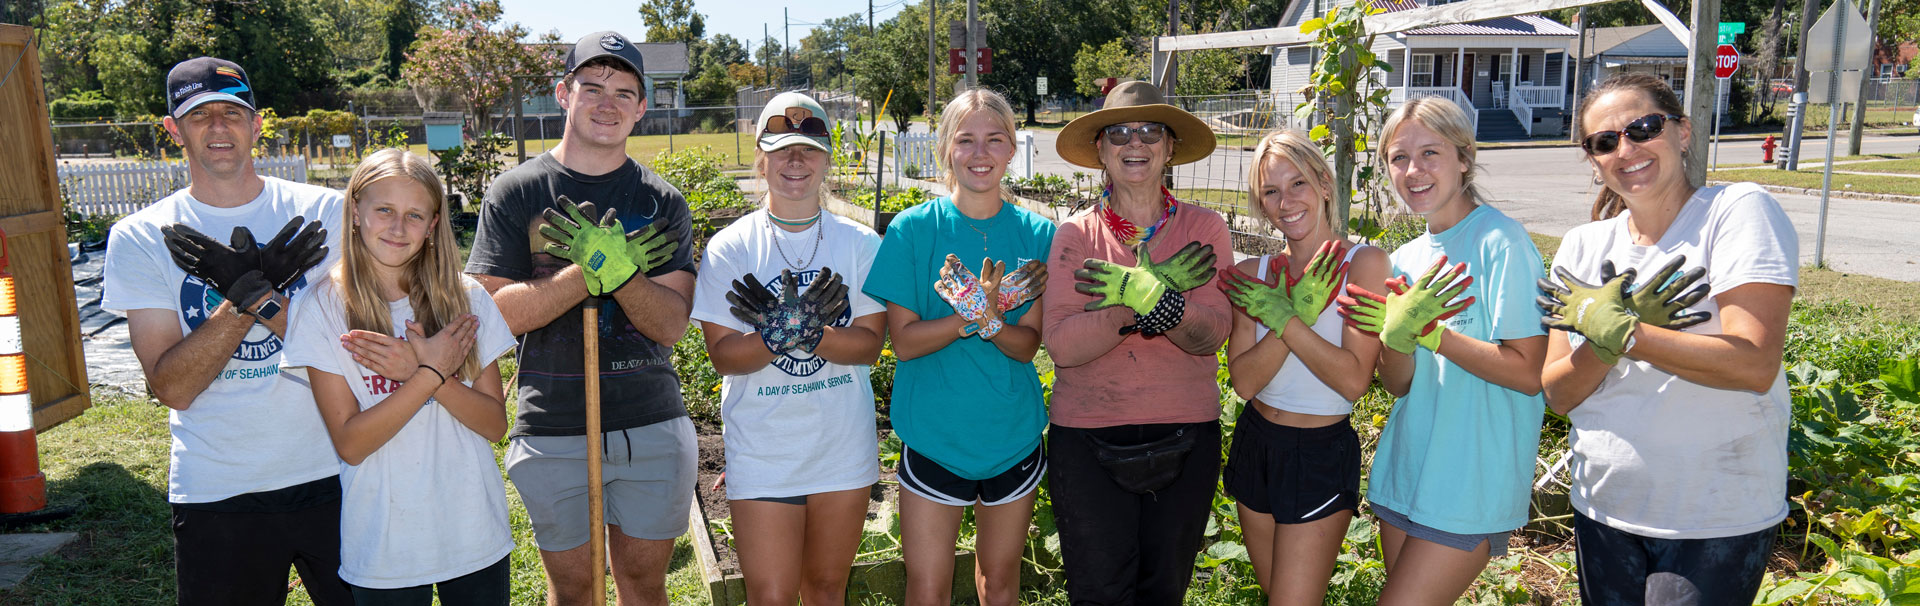 People pose with gloves after completing yard work